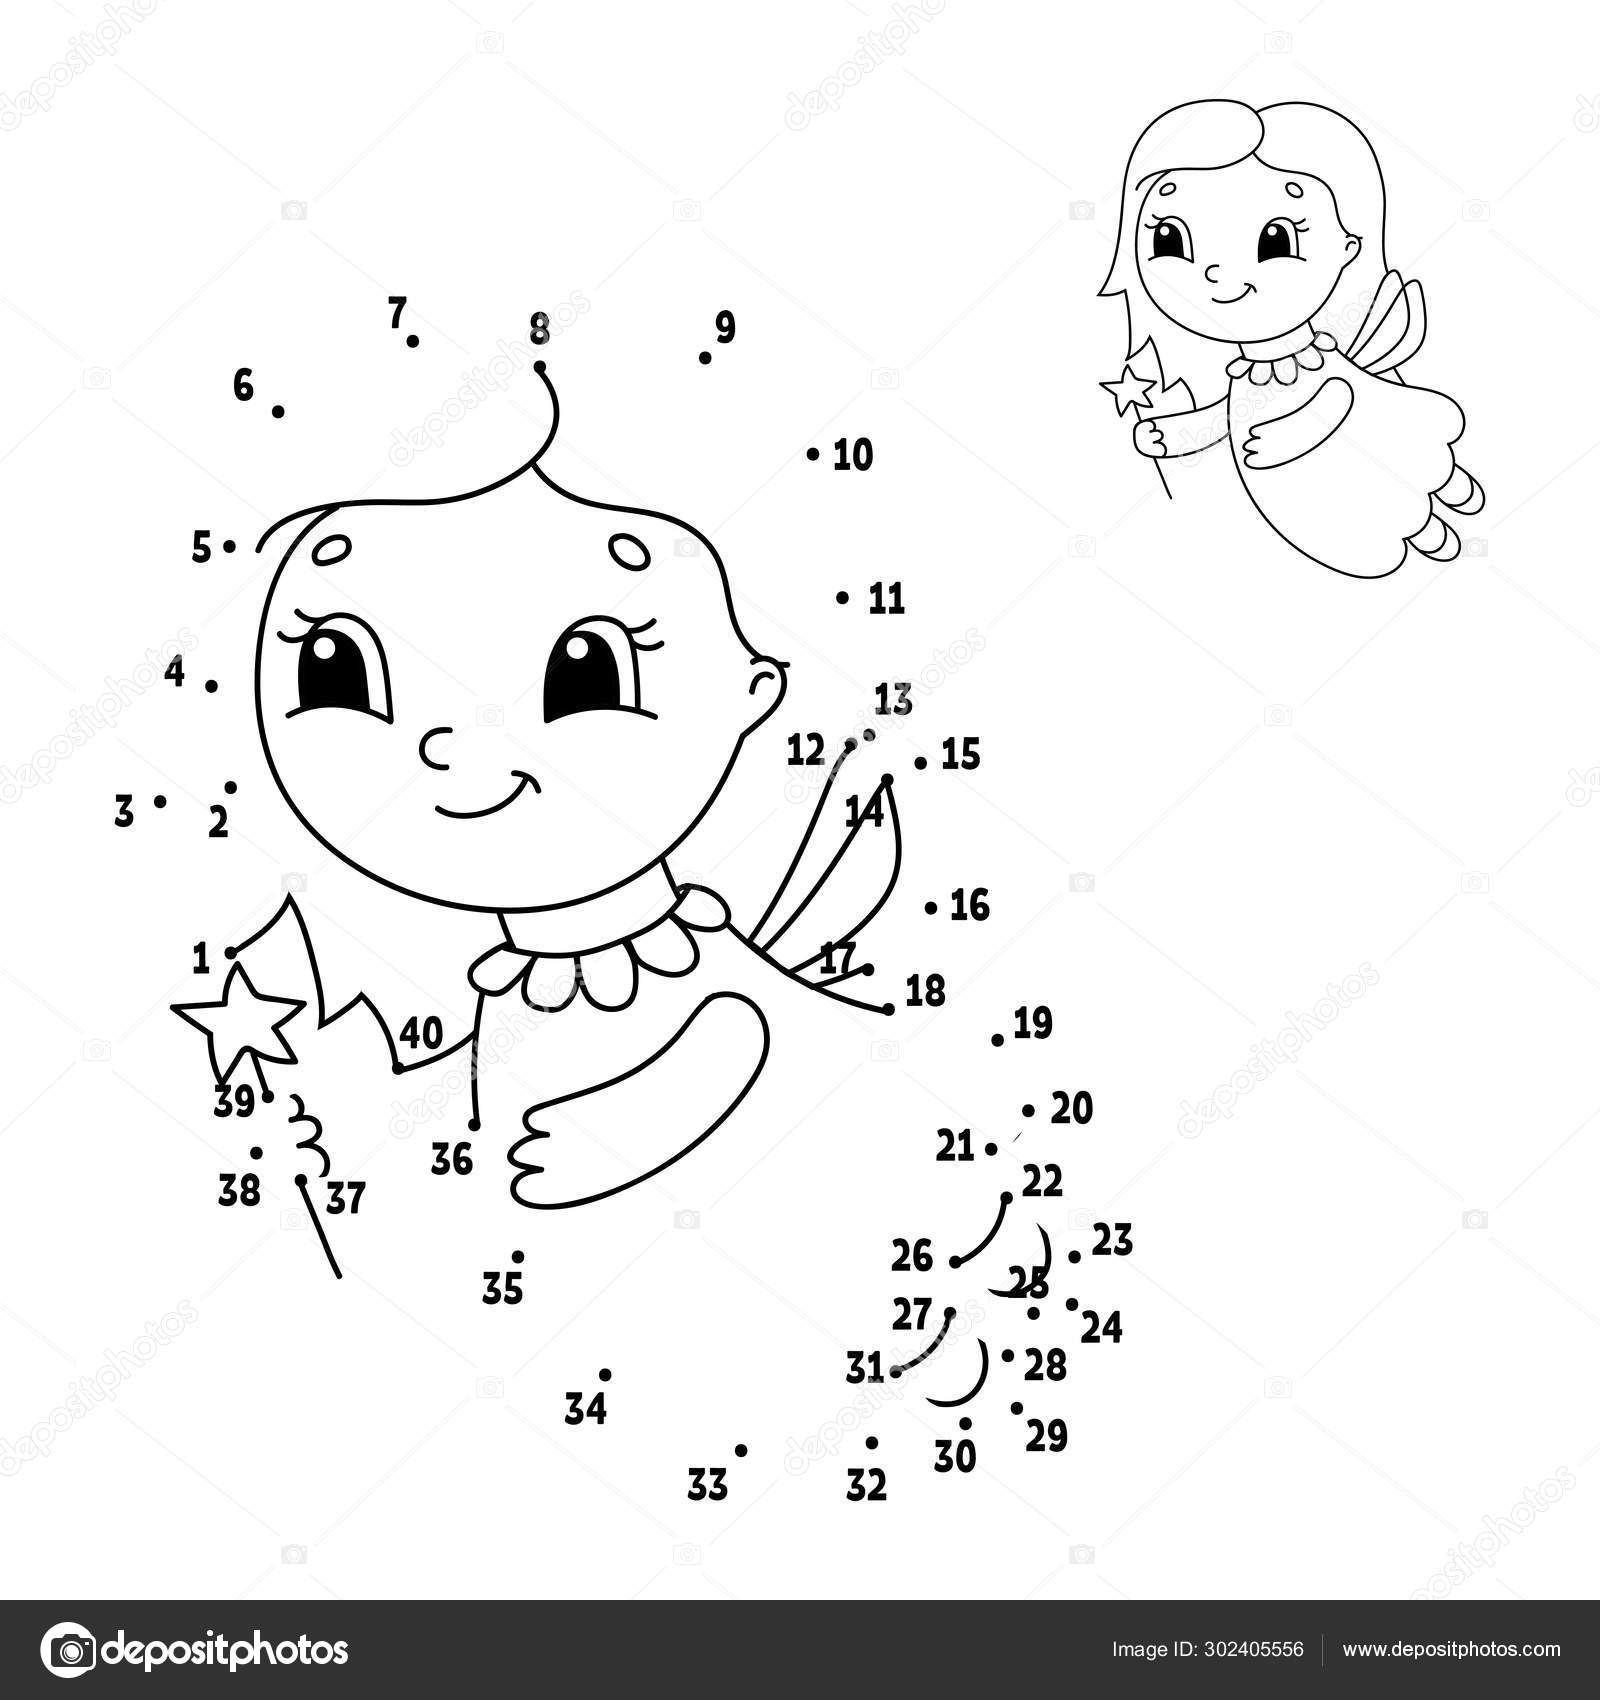 trace-the-numbers-worksheets-activity-shelter